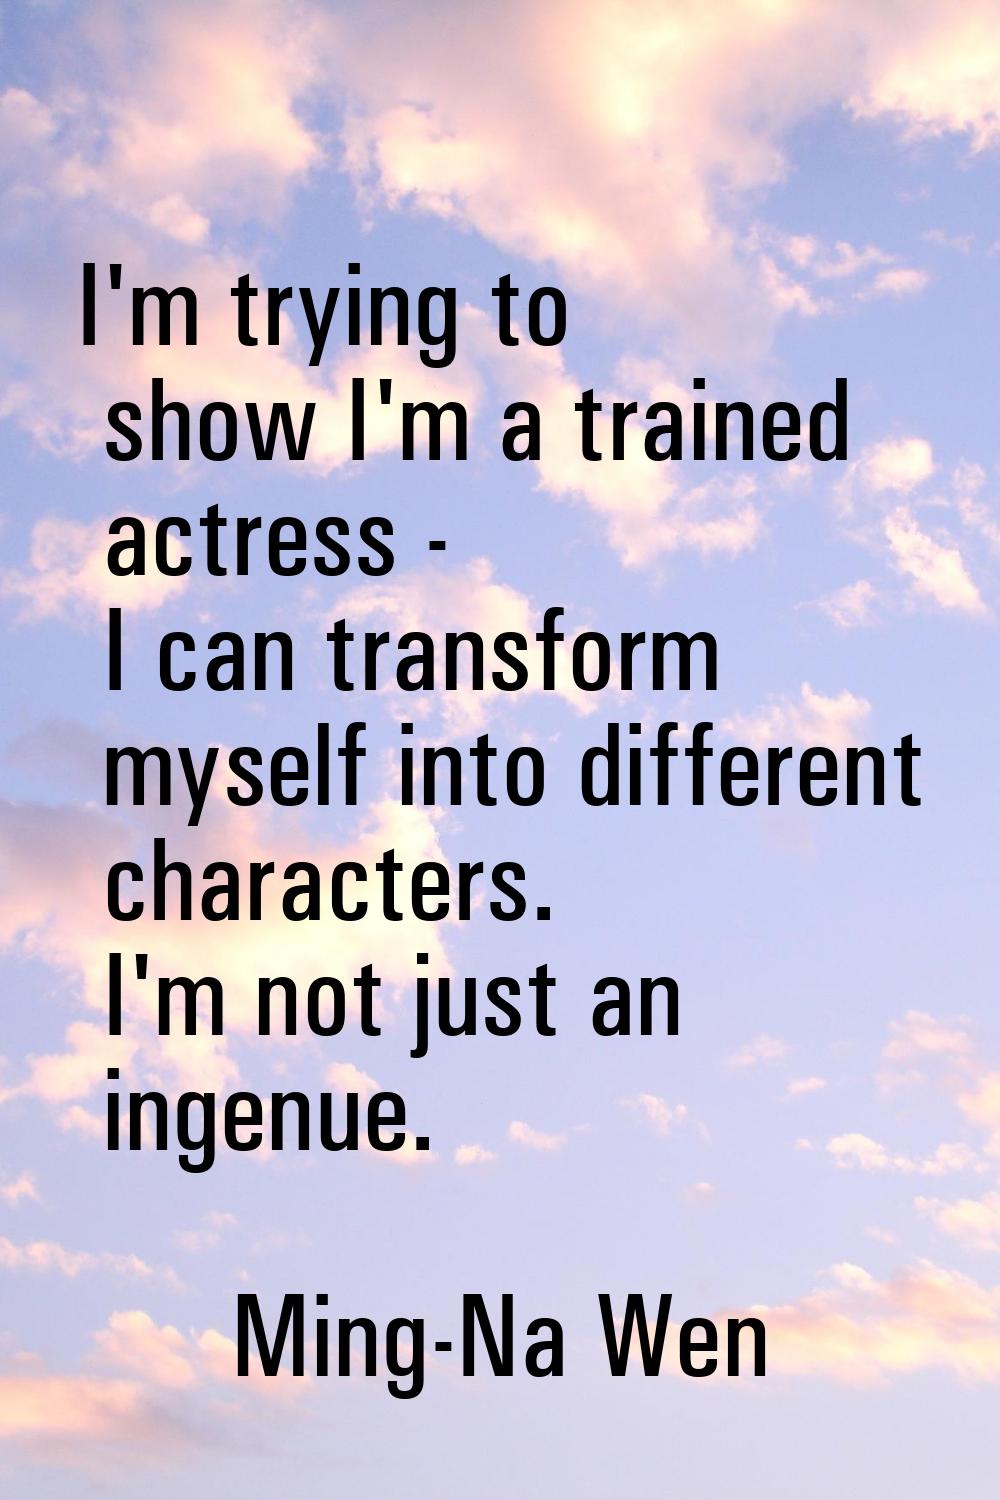 I'm trying to show I'm a trained actress - I can transform myself into different characters. I'm no